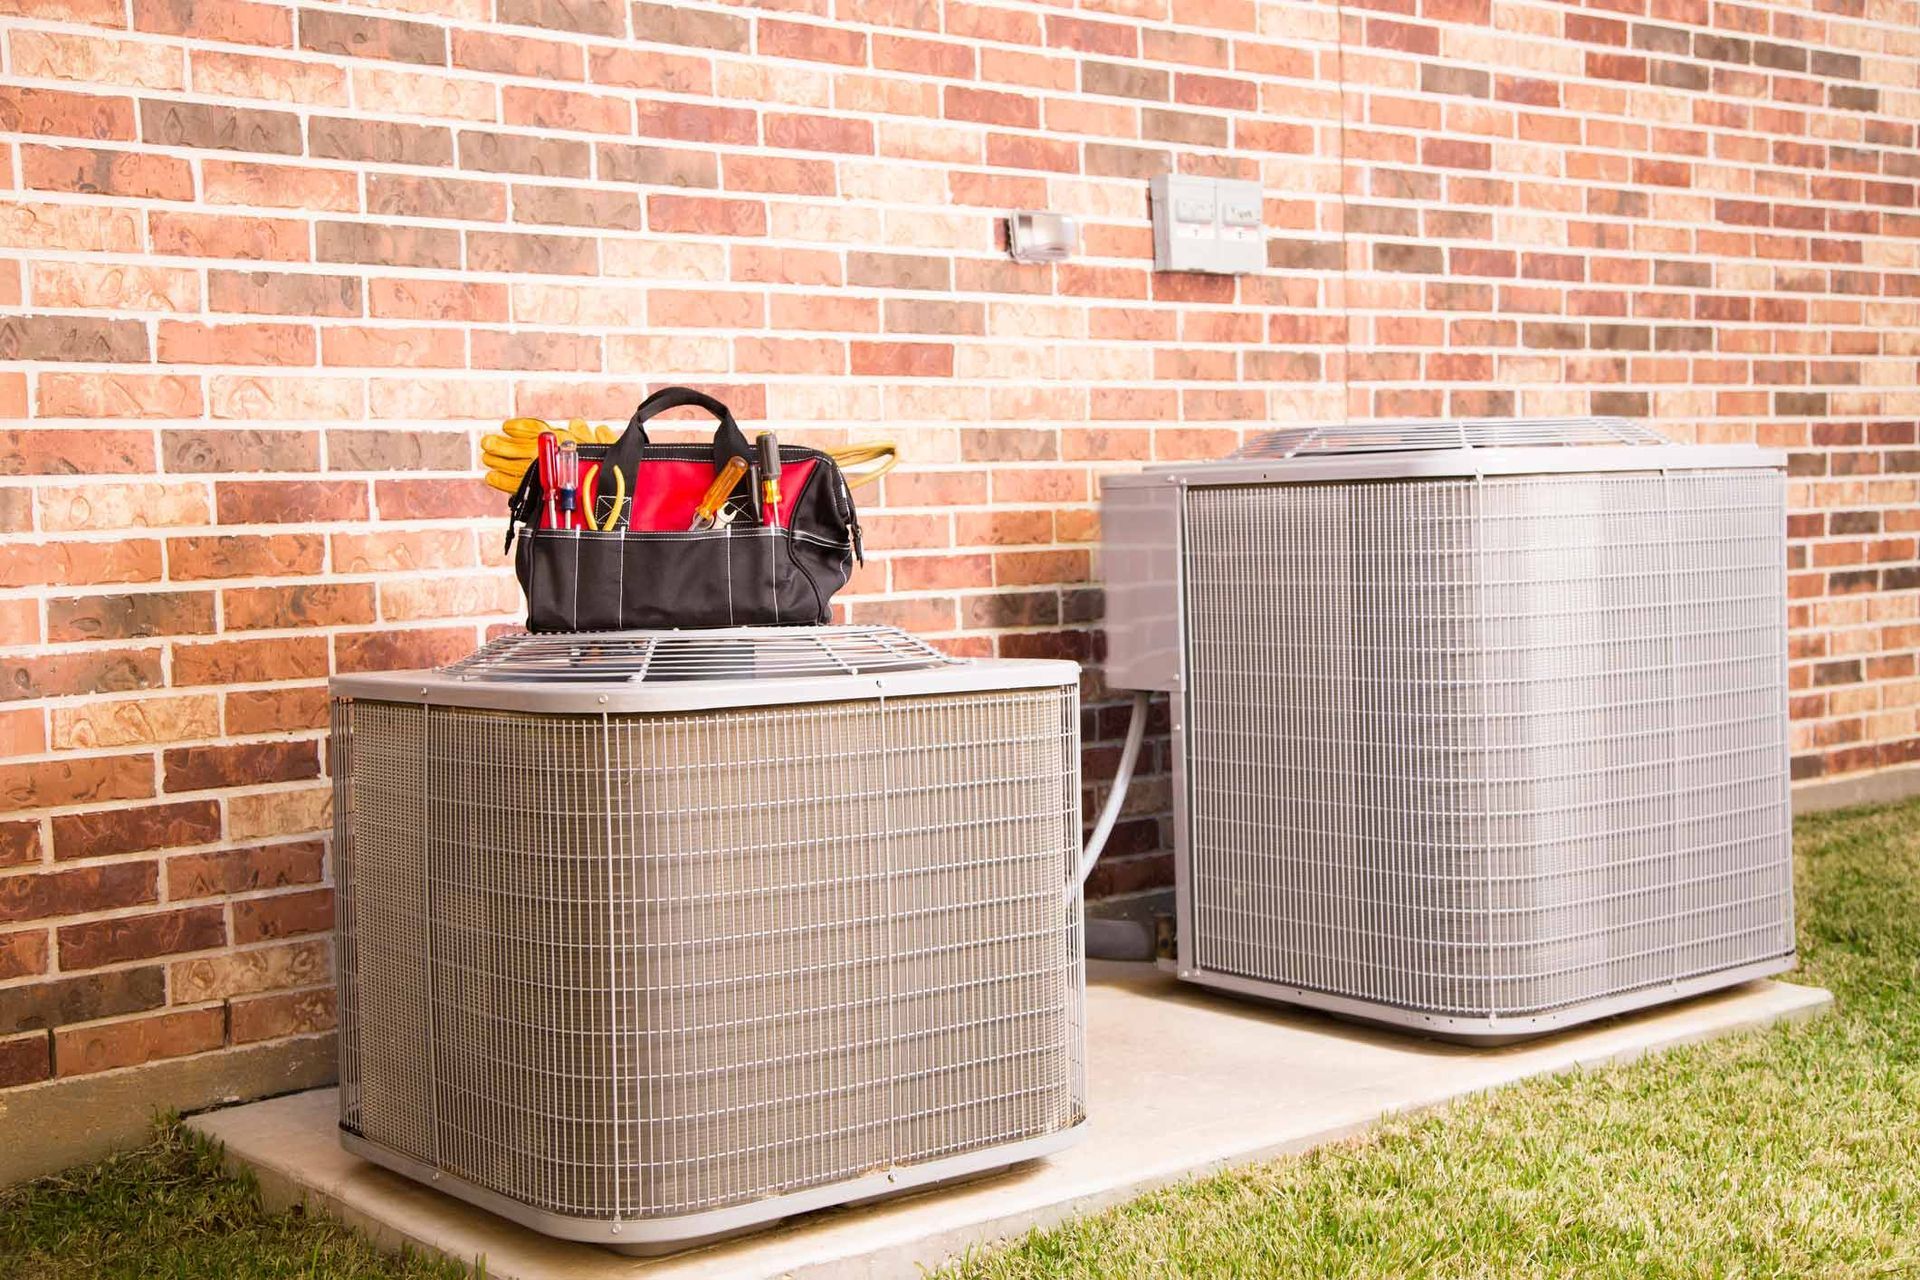 Work Tools On Air Conditioners - Freeport, TX - A1 Comfort Systems